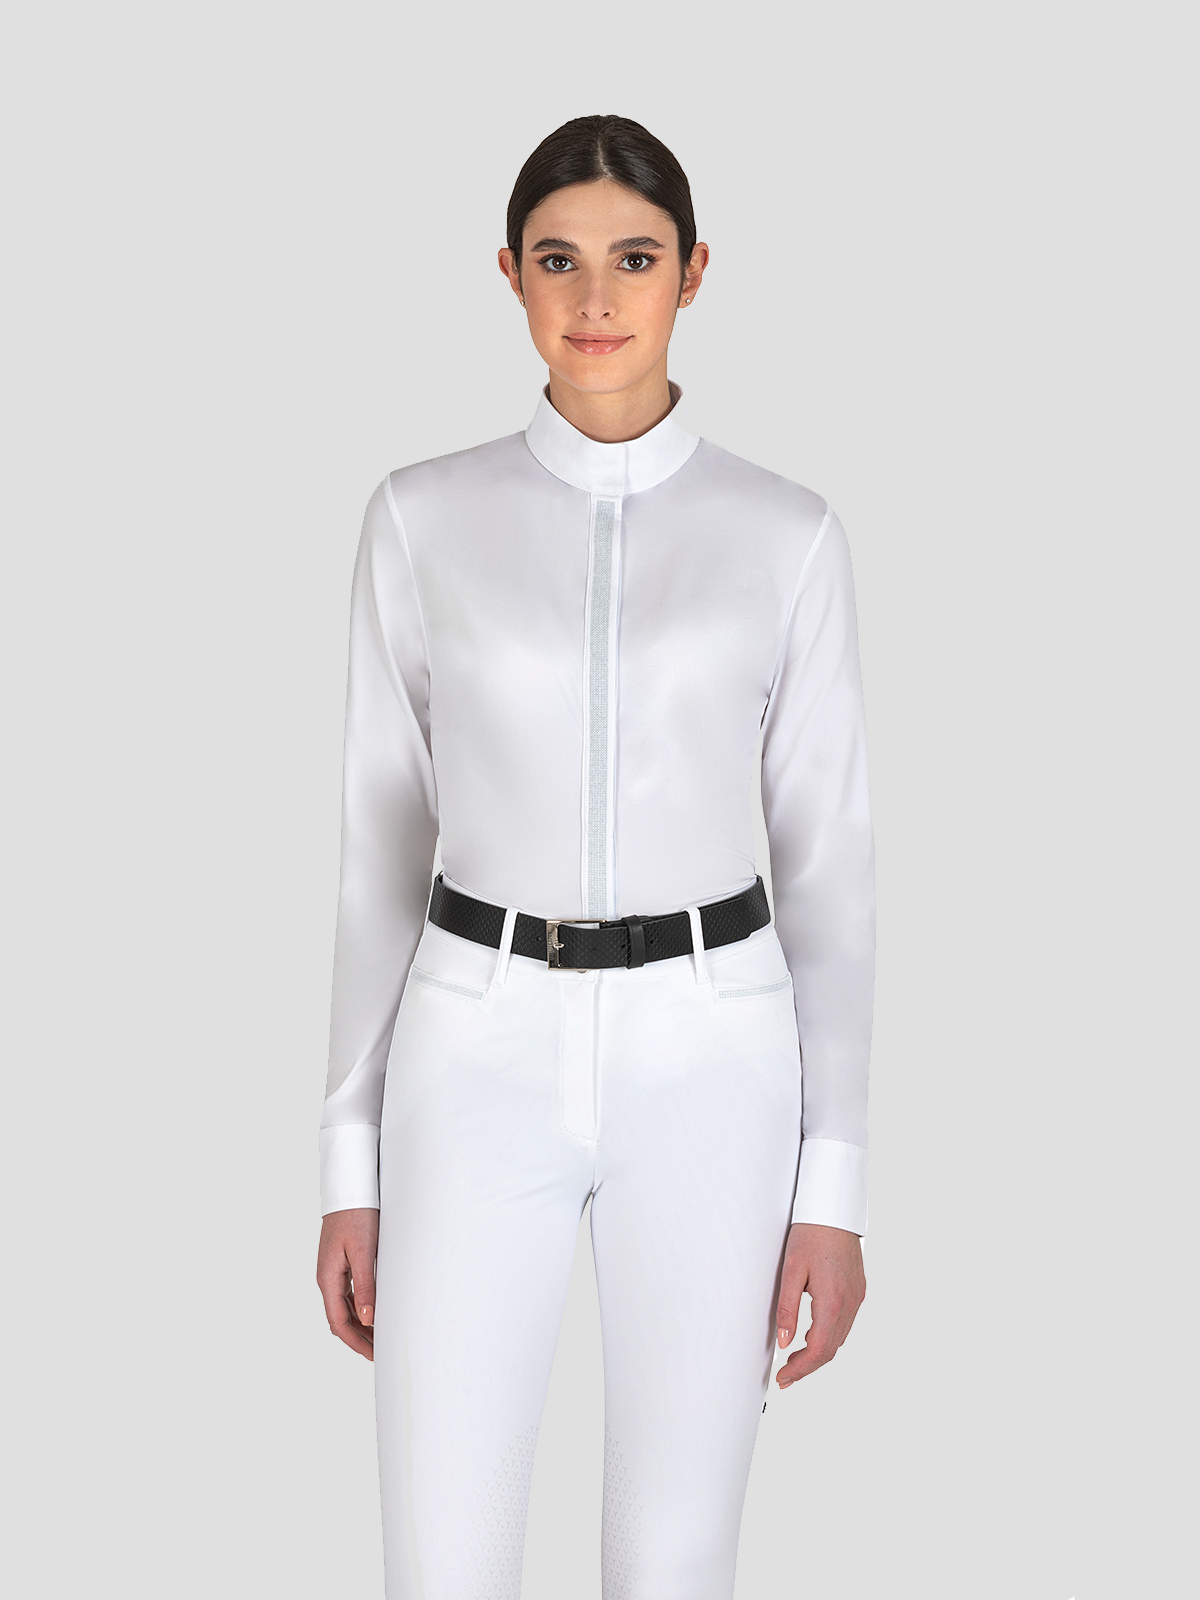 Esade long Sleeve Women's Show Shirt - front view - white color